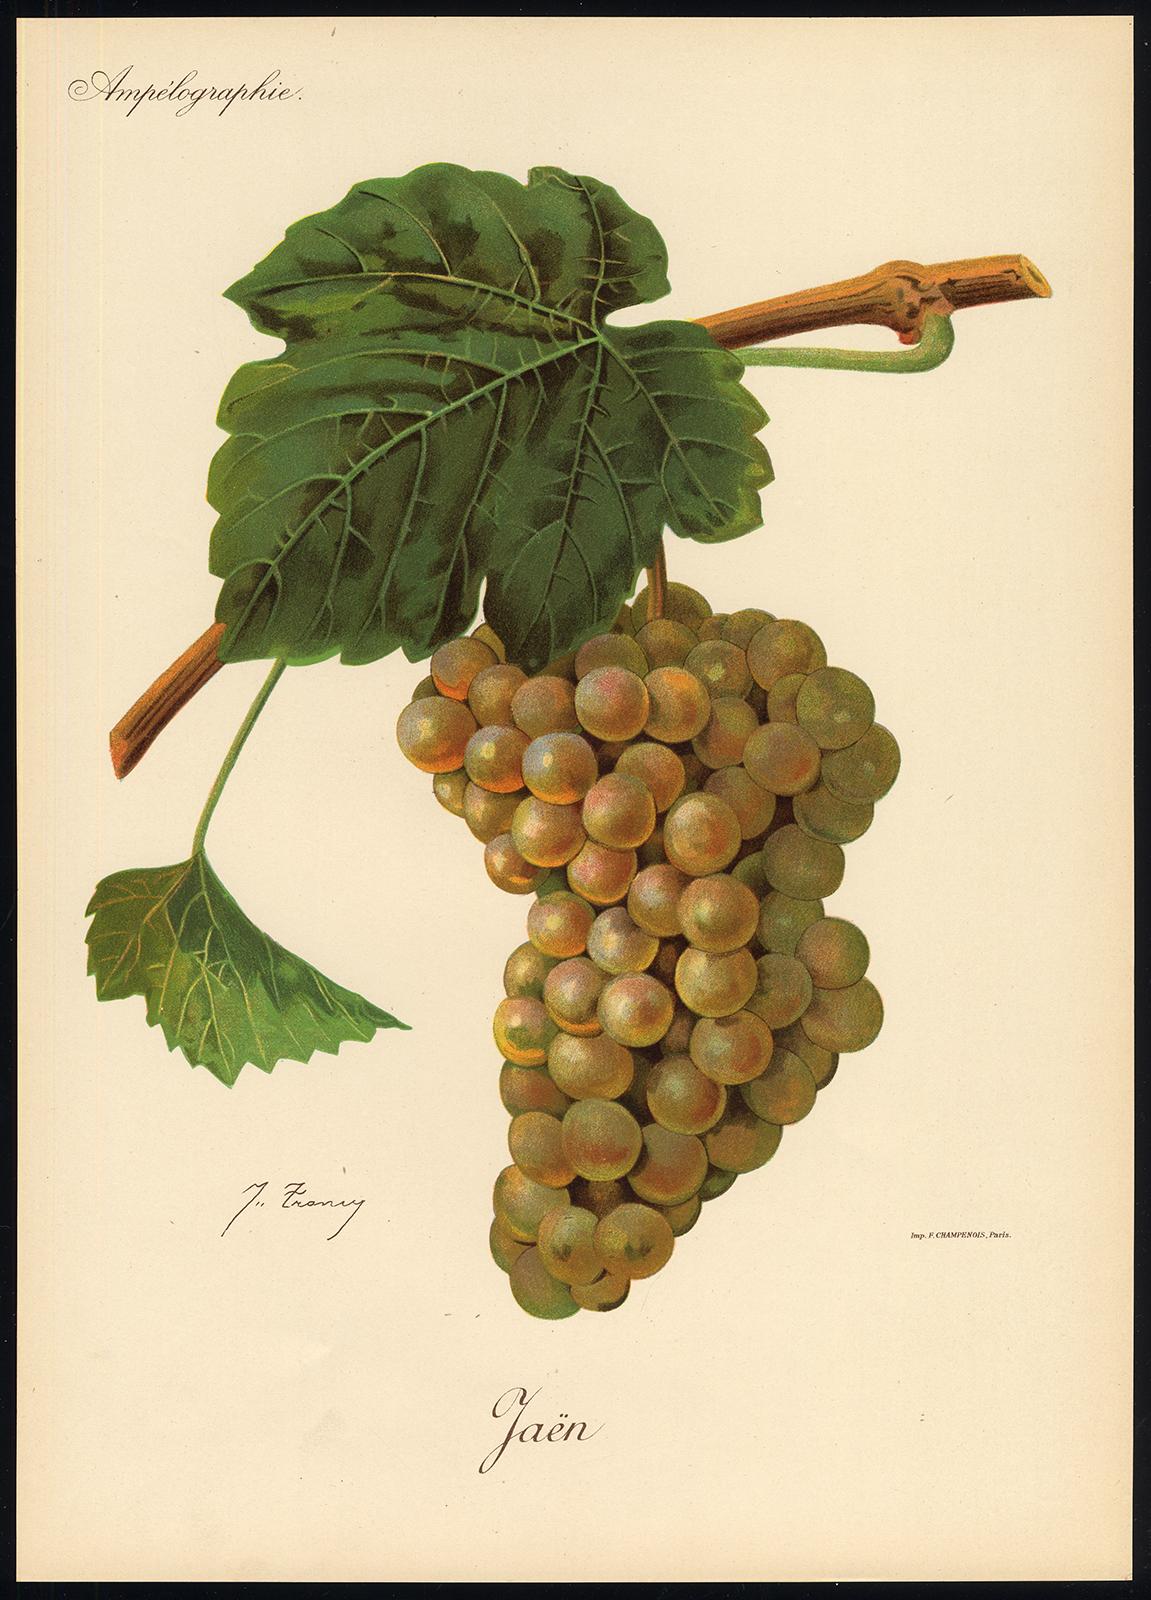 The Jean grape - from Ampelography by Vermorel - Lithograph - Early 20th century - Print by Victor Vermorel